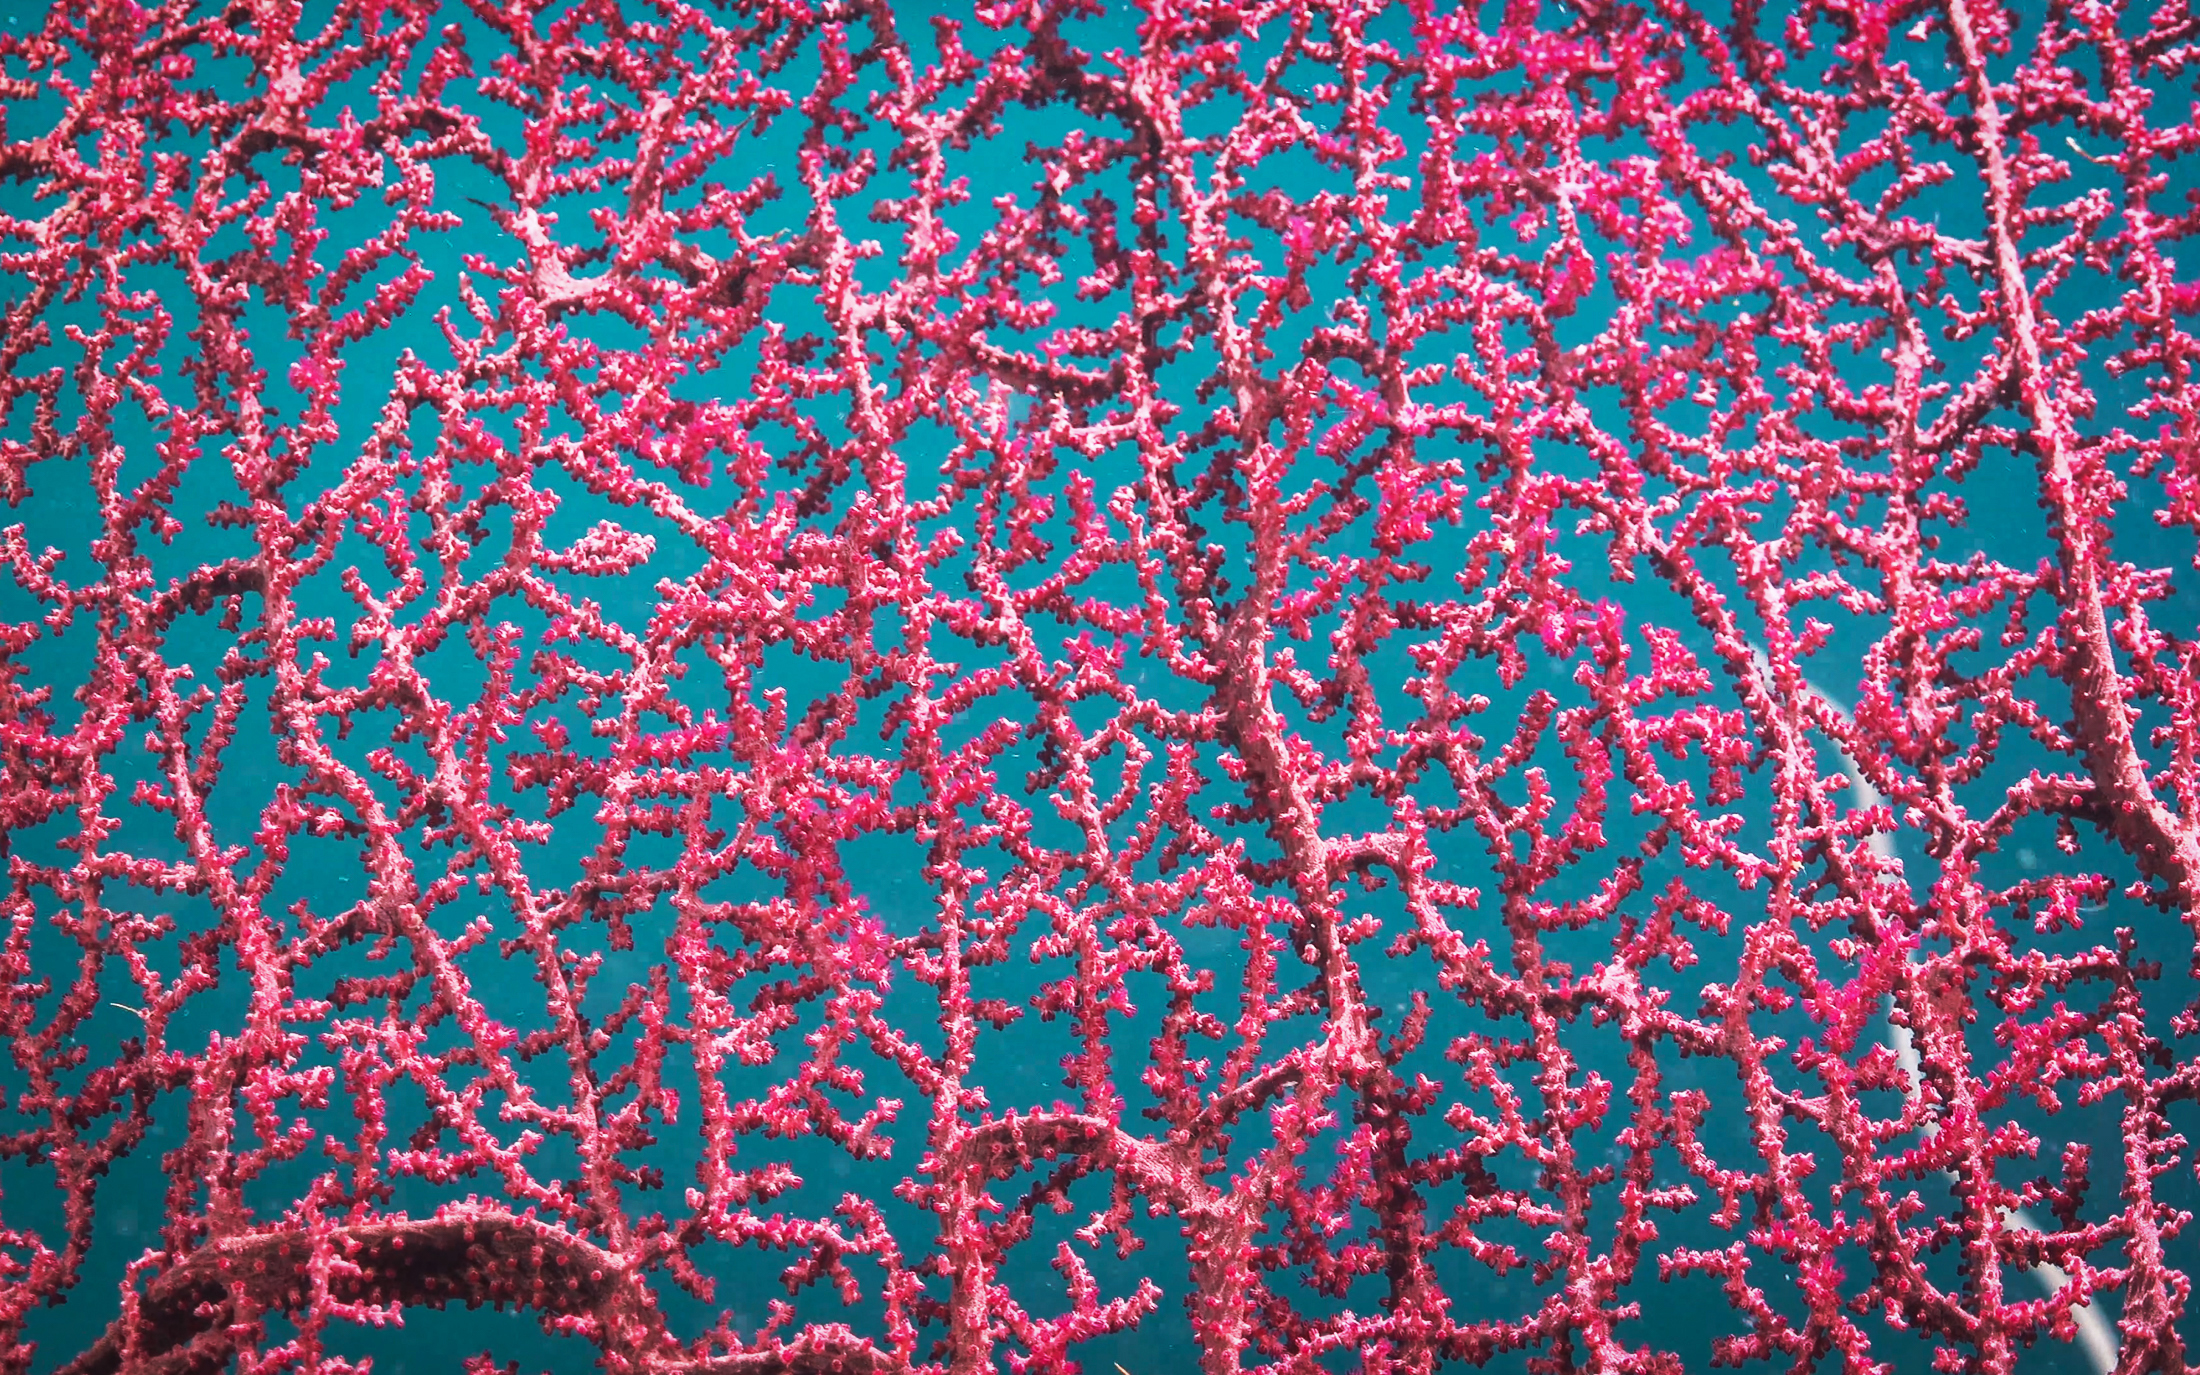 A detail of a gorgonian fans documented by ROV SuBastian on Dive 410 (April 16 2021) on the sea floor of Ashmore Reef. Like other corals, gorgonians have polyps. The polyps have tentacles arranged as a pennate, which means they have one main tentacle with branches off of it, like a feather. They can withdraw into the leathery tissue of the coral.